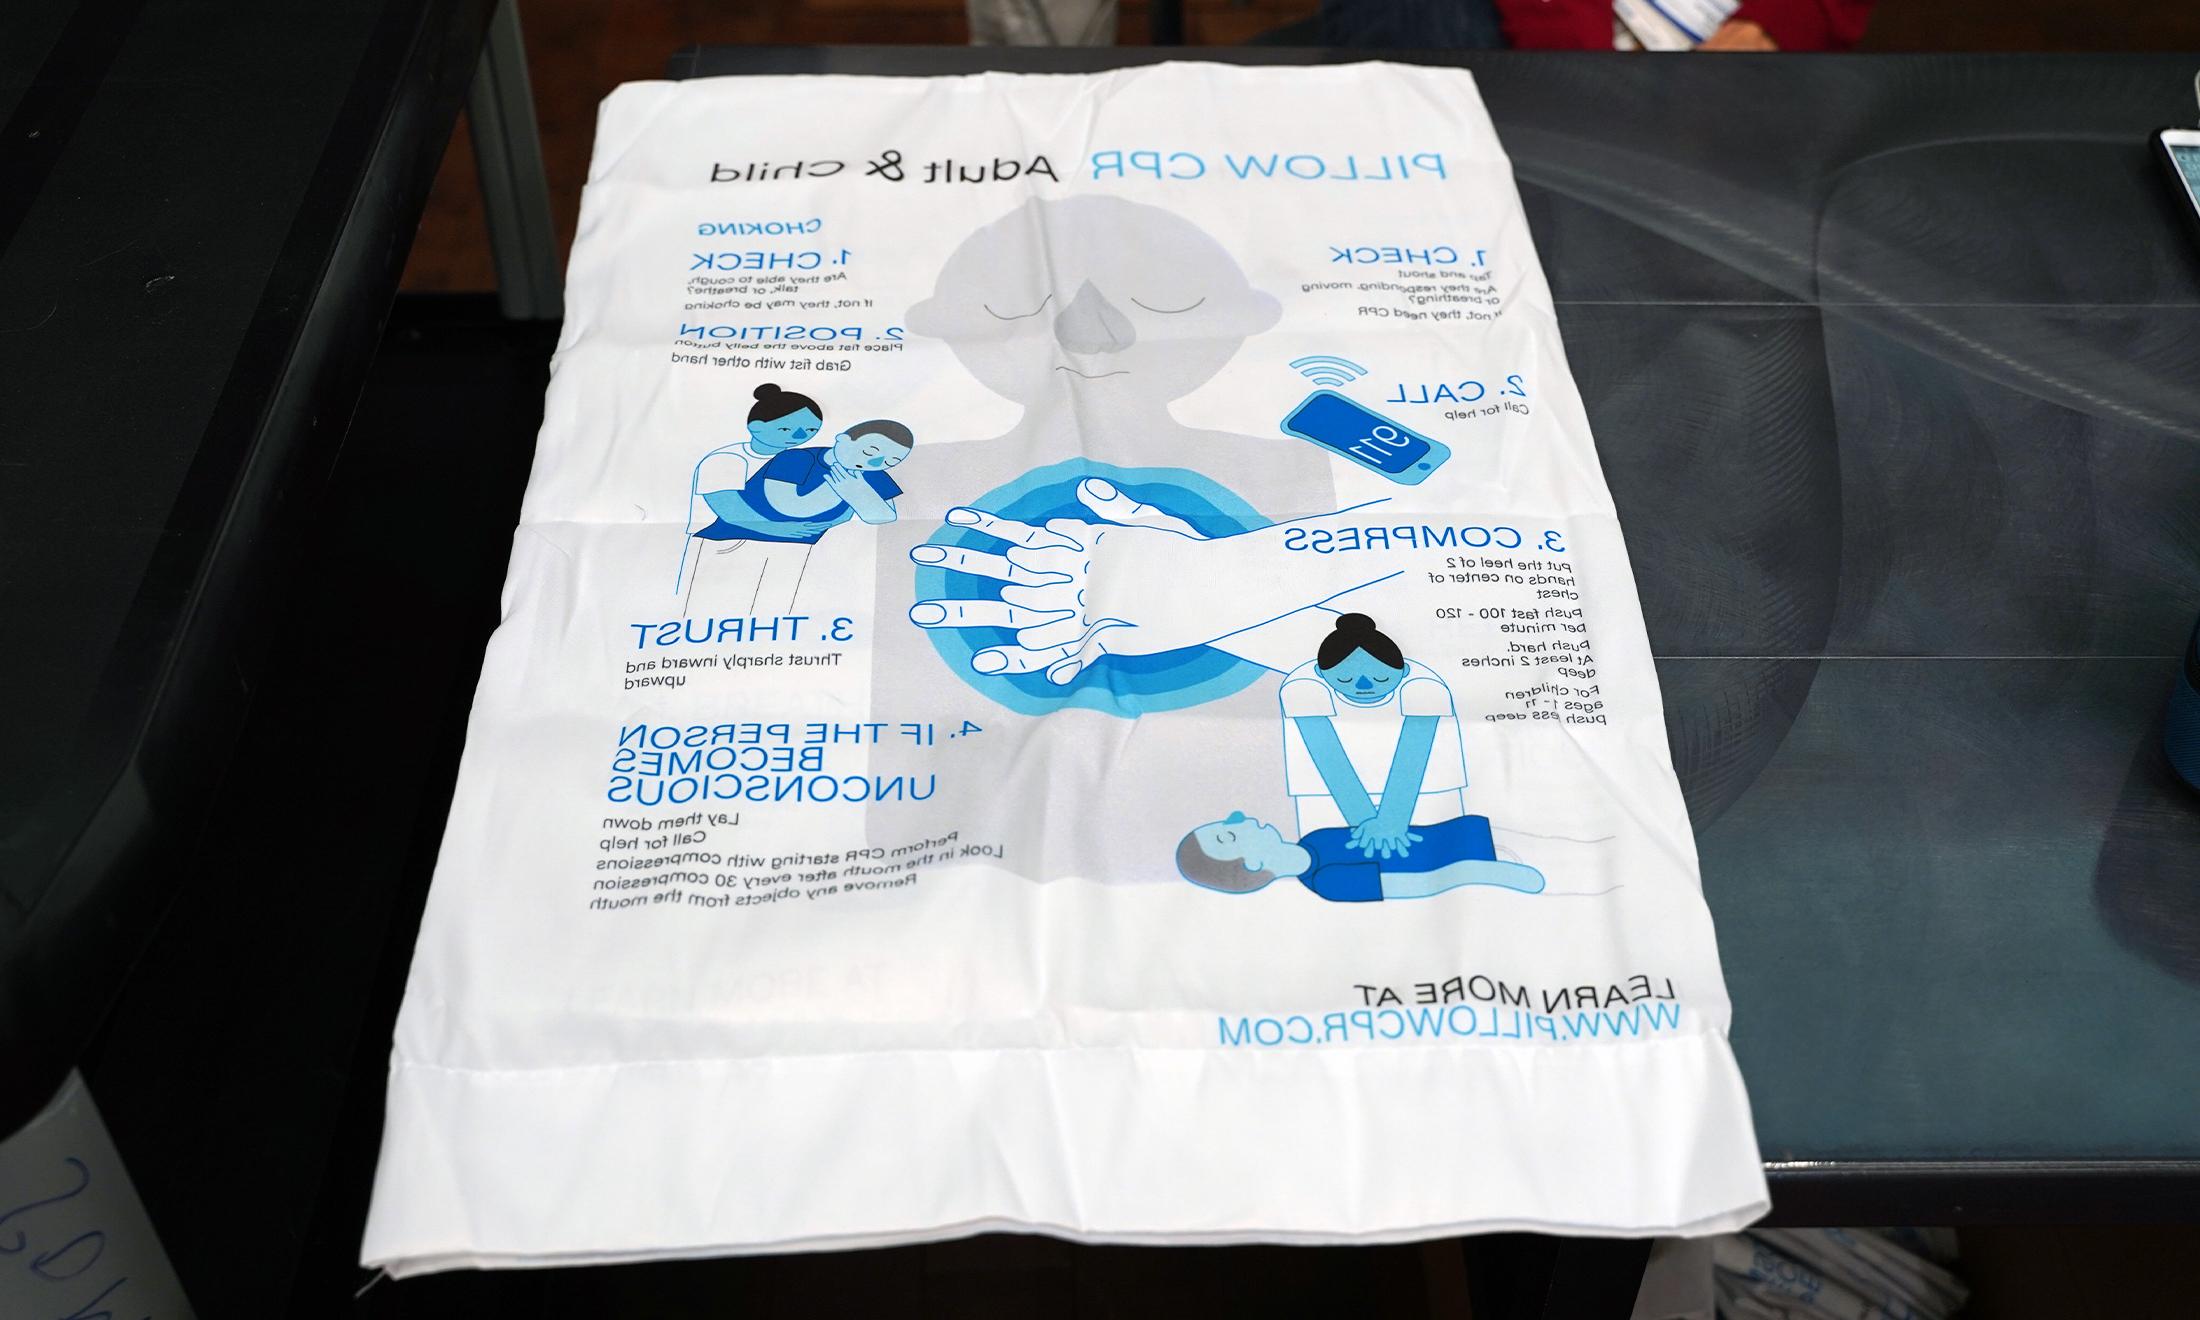 An image of the pillowcase designed by Goldstein